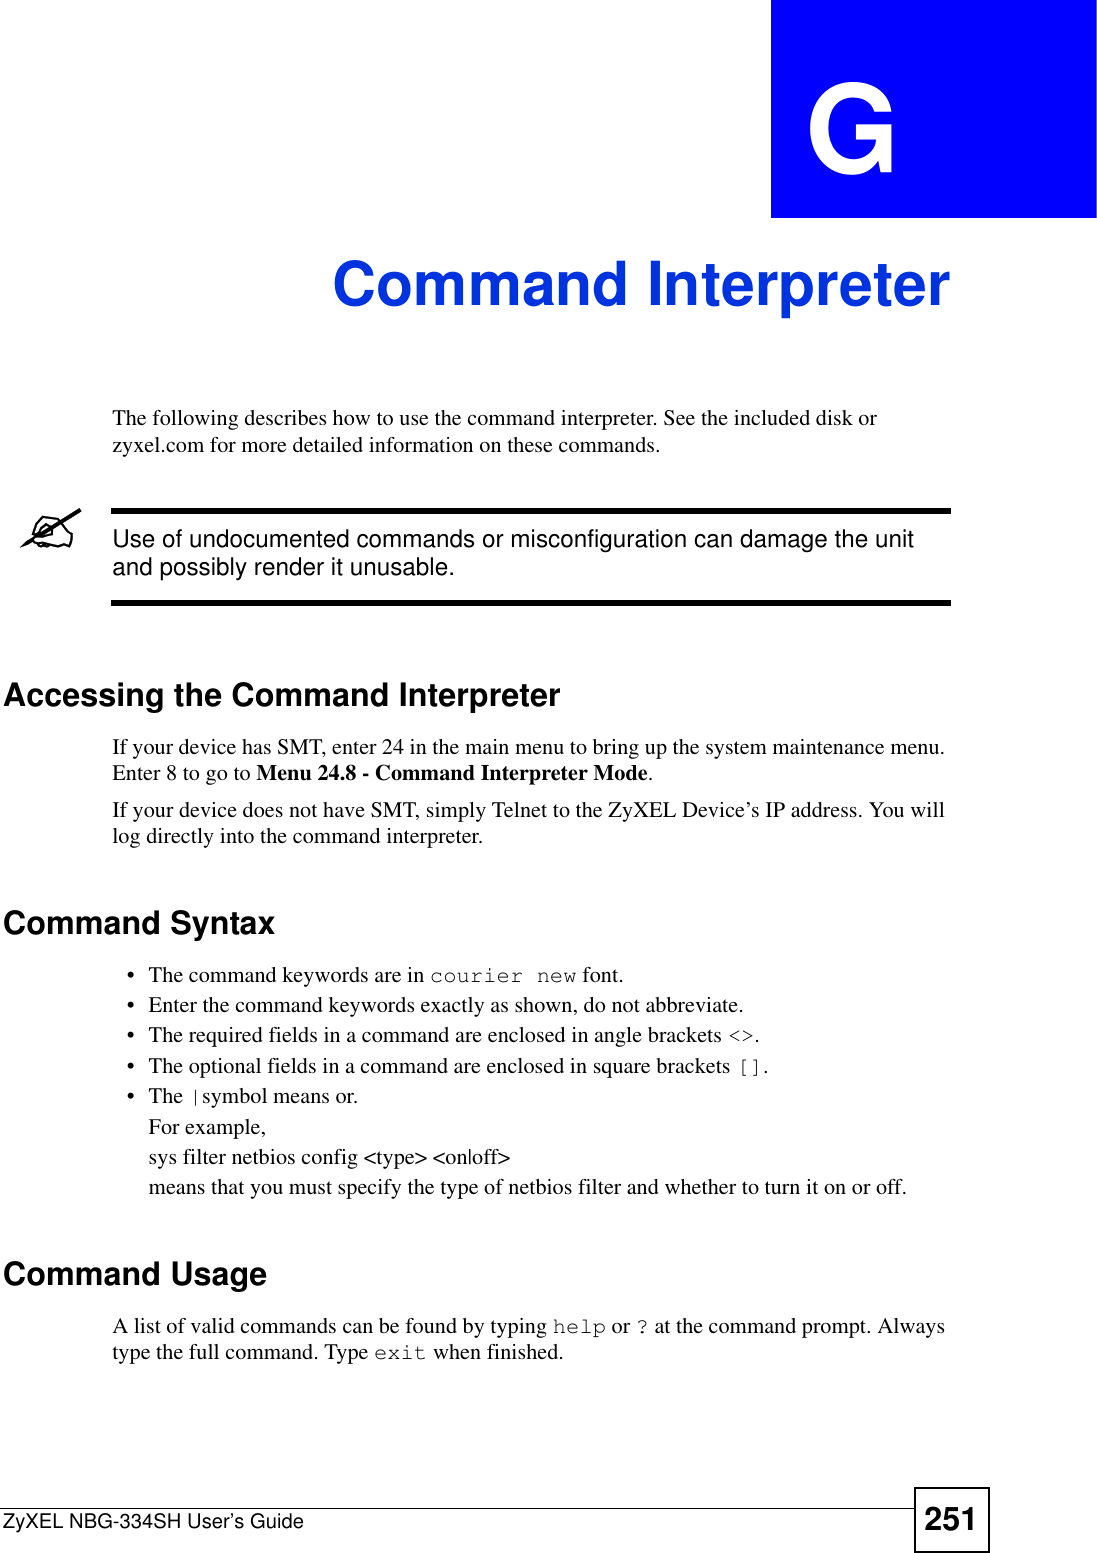 ZyXEL NBG-334SH User’s Guide 251APPENDIX  G Command InterpreterThe following describes how to use the command interpreter. See the included disk or zyxel.com for more detailed information on these commands.&quot;Use of undocumented commands or misconfiguration can damage the unit and possibly render it unusable.Accessing the Command InterpreterIf your device has SMT, enter 24 in the main menu to bring up the system maintenance menu. Enter 8 to go to Menu 24.8 - Command Interpreter Mode.If your device does not have SMT, simply Telnet to the ZyXEL Device’s IP address. You will log directly into the command interpreter.  Command Syntax• The command keywords are in courier new font.• Enter the command keywords exactly as shown, do not abbreviate.• The required fields in a command are enclosed in angle brackets &lt;&gt;.• The optional fields in a command are enclosed in square brackets [].•The |symbol means or.For example,sys filter netbios config &lt;type&gt; &lt;on|off&gt;means that you must specify the type of netbios filter and whether to turn it on or off.Command UsageA list of valid commands can be found by typing help or ? at the command prompt. Always type the full command. Type exit when finished.